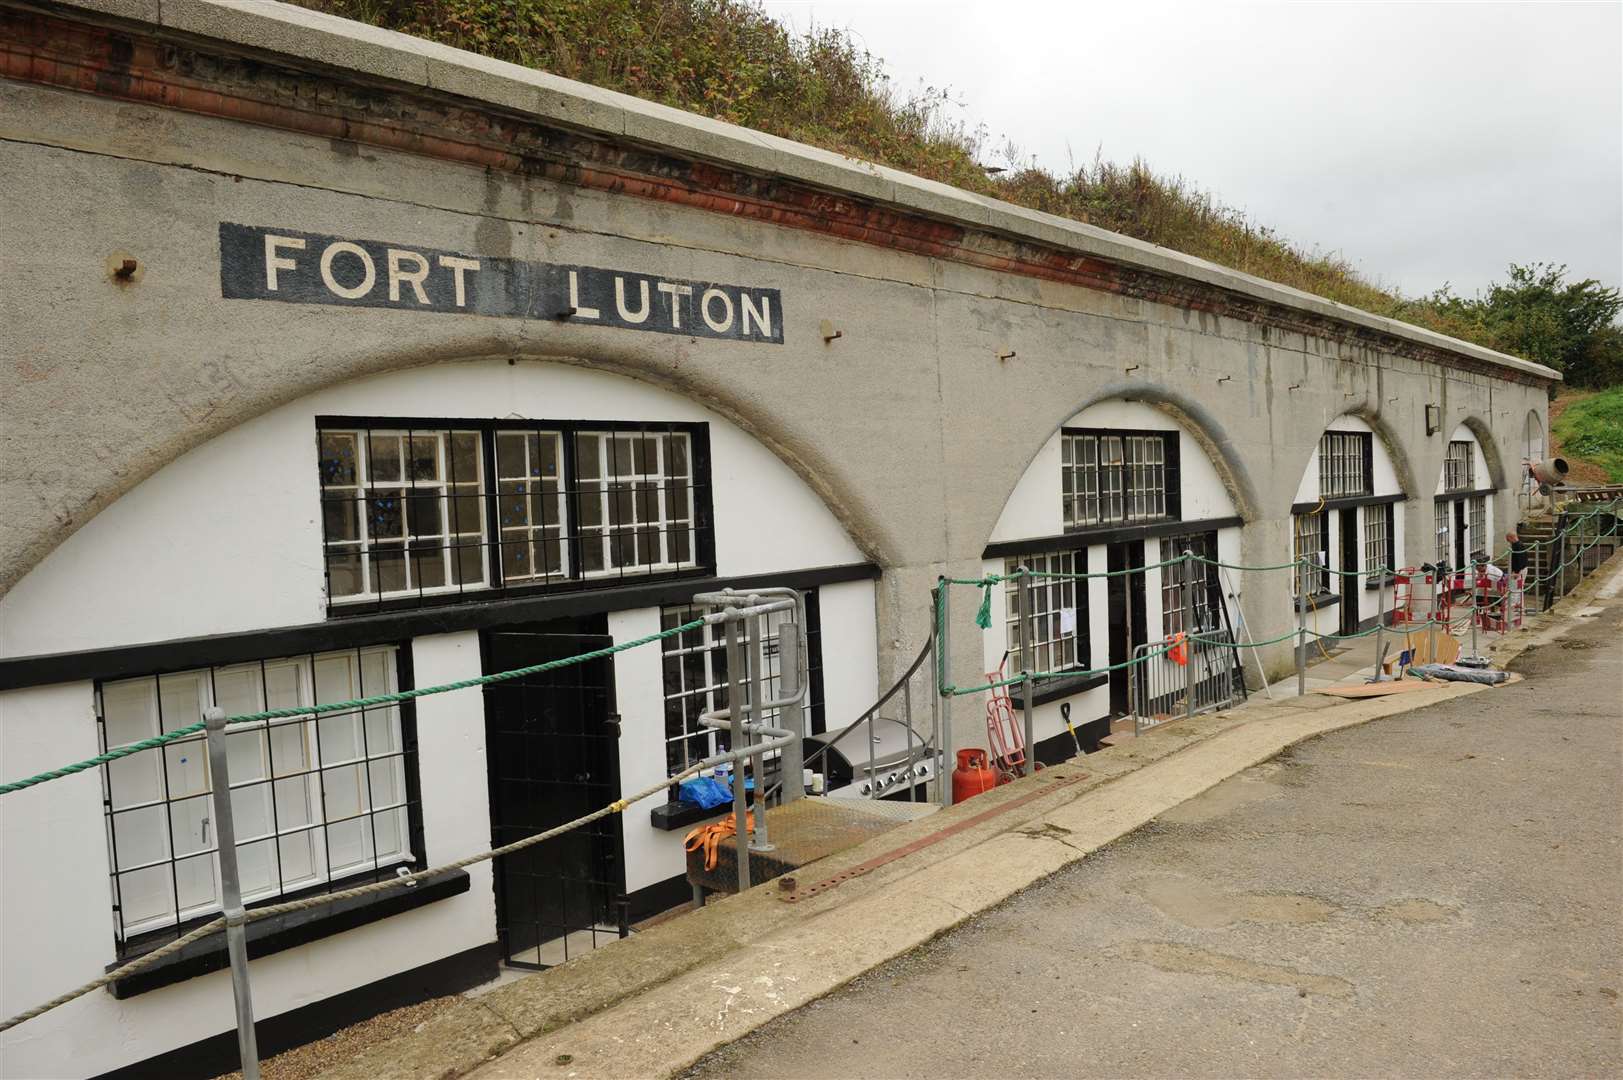 Fort Luton, Magpie Hall Road, Chatham.Picture: Steve Crispe